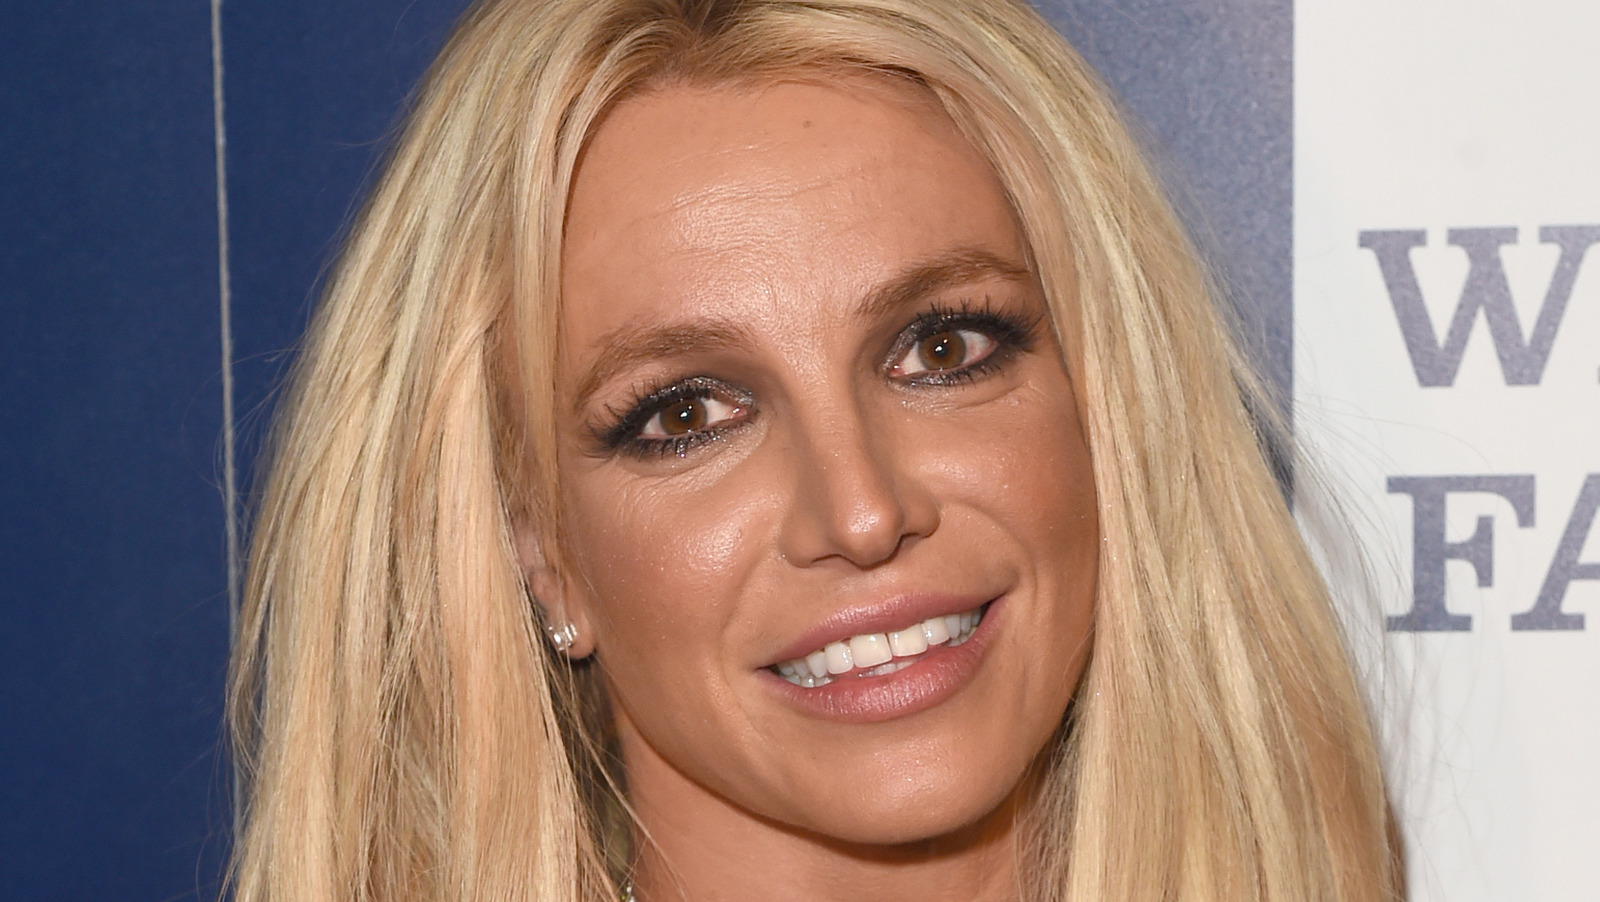 Inside Britney Spears Emotional Post About The Framing Documentary 3476